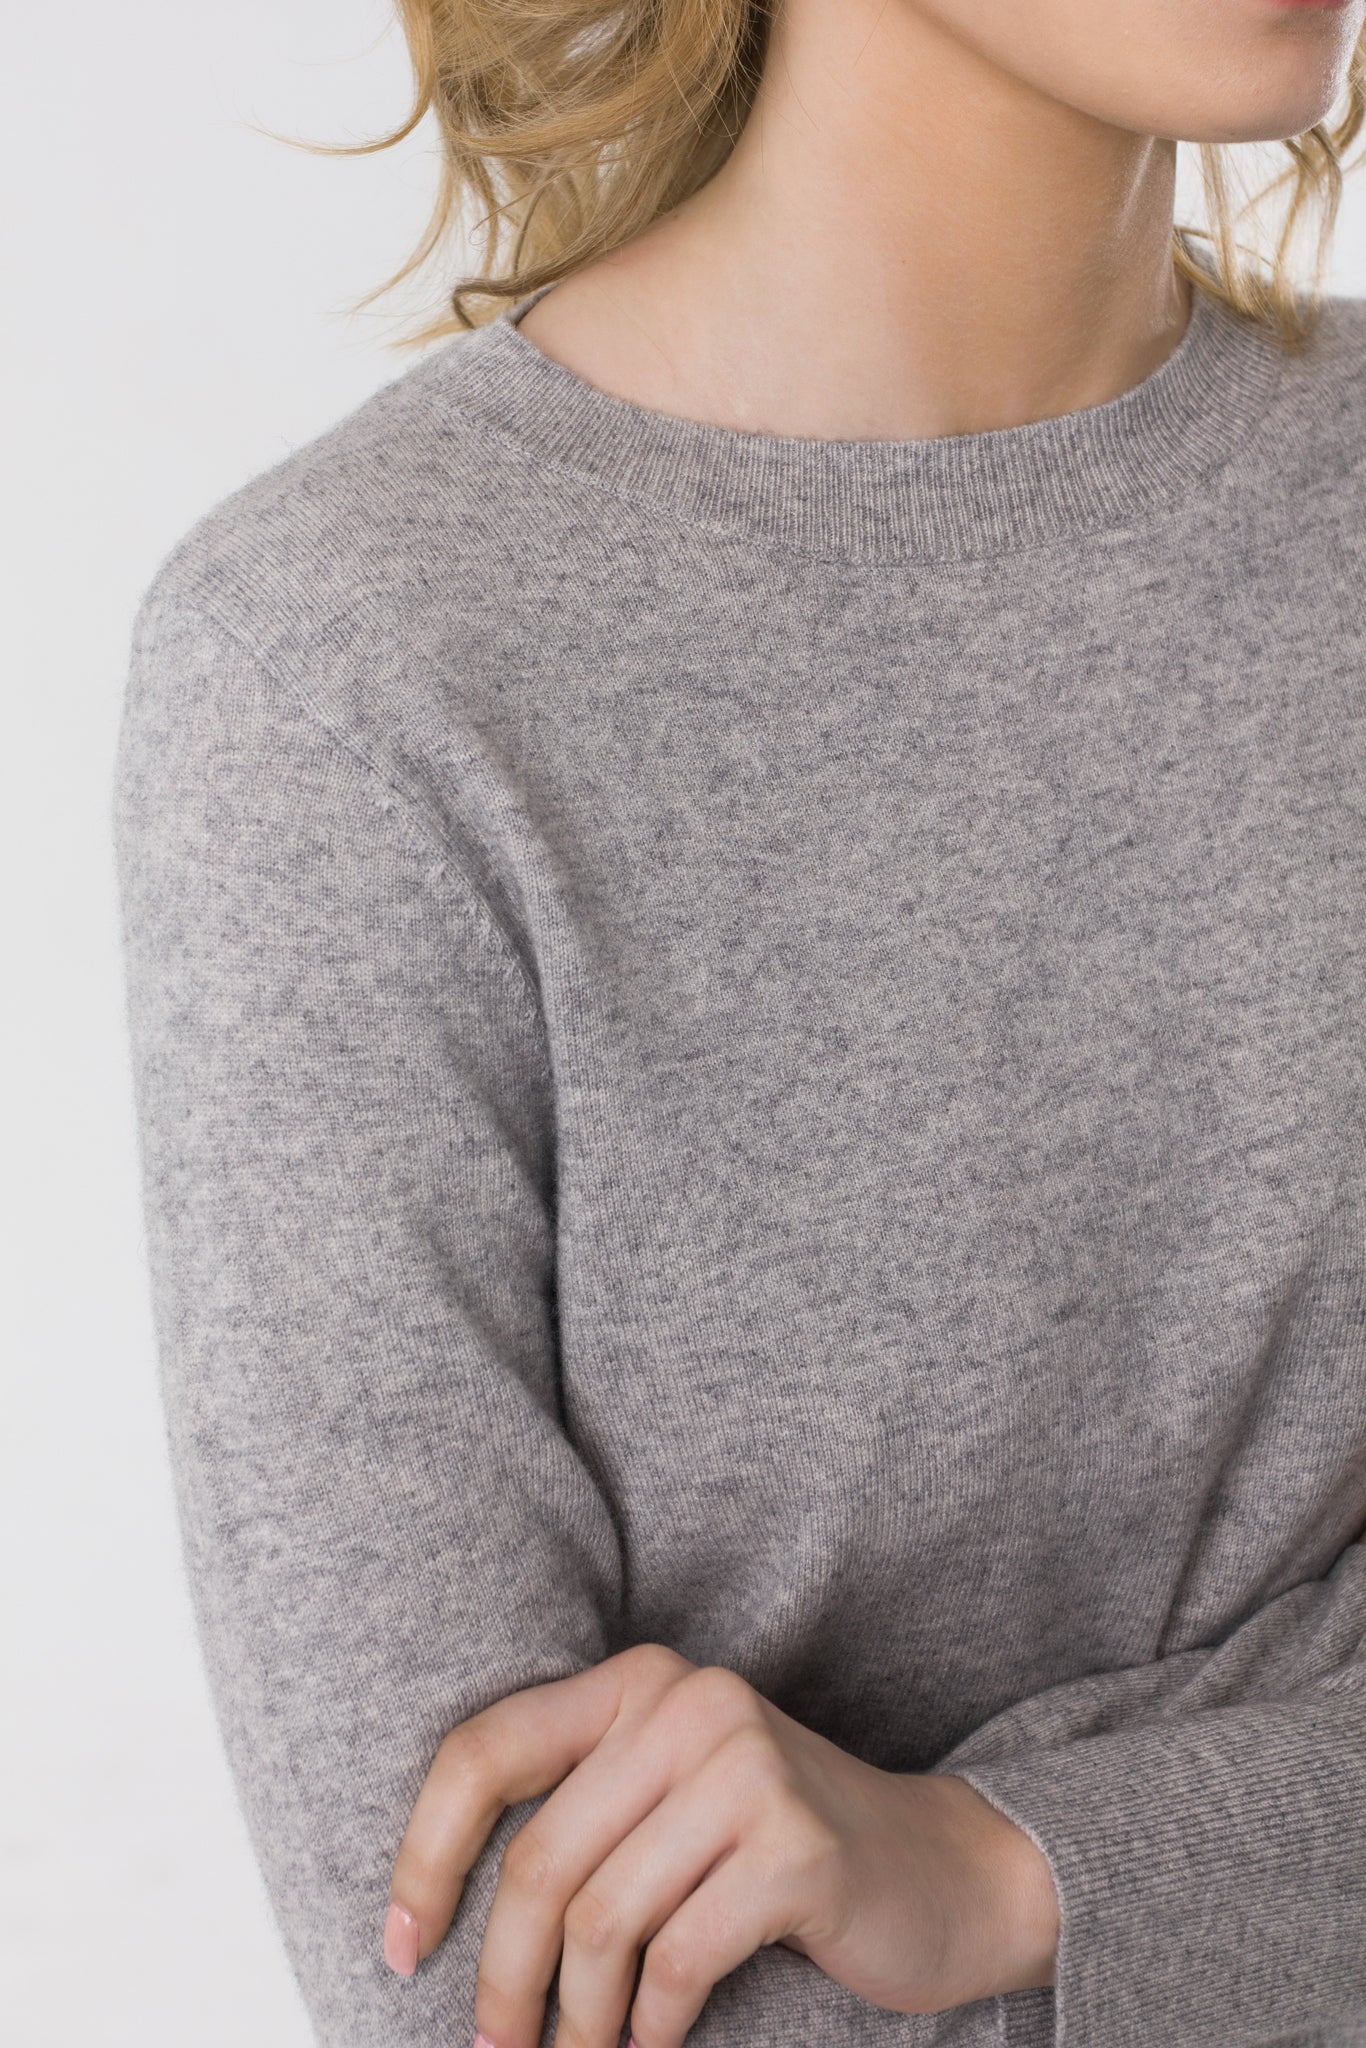 The complete guide on how to care for your cashmere